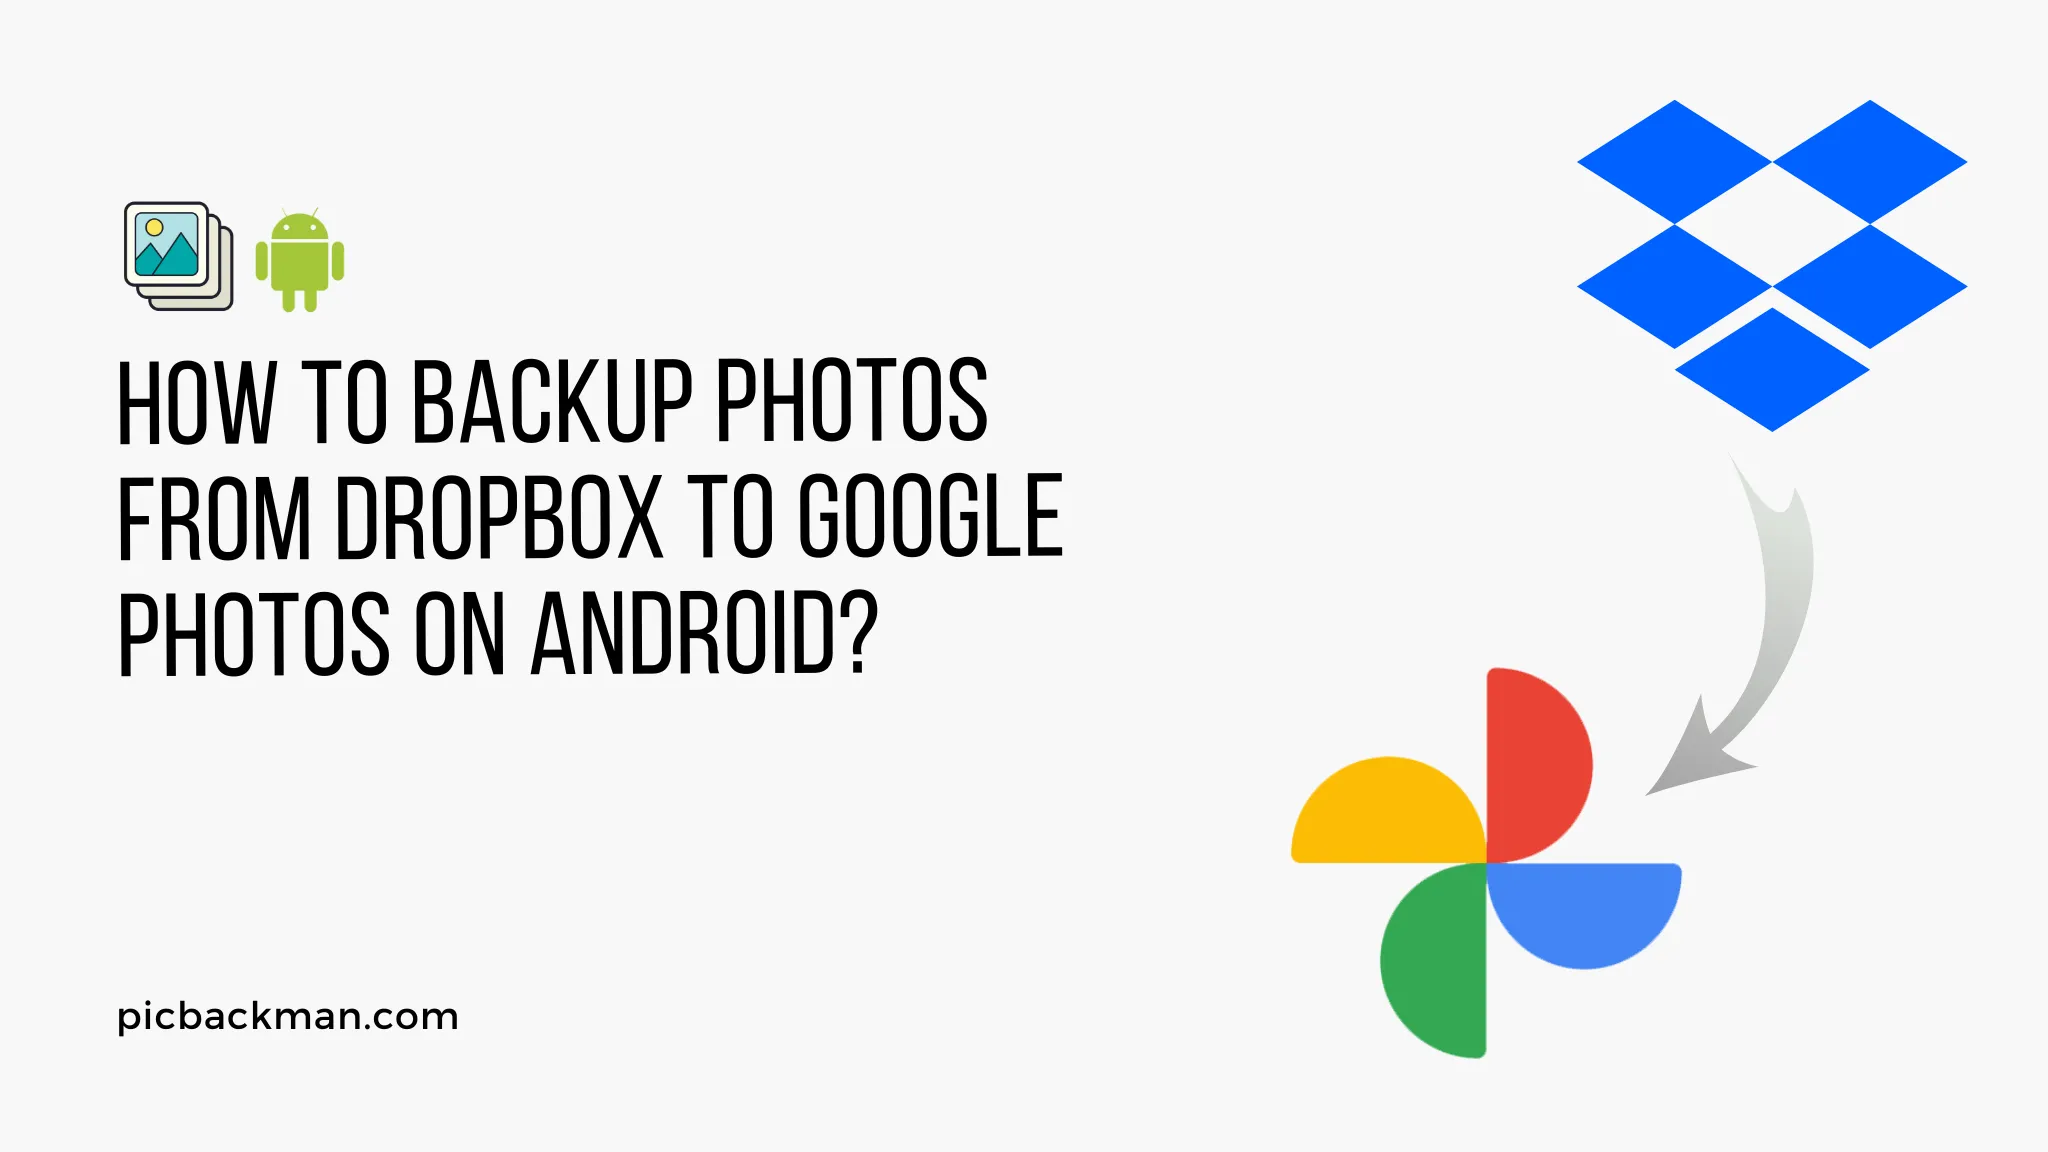 How to Backup Photos from Dropbox to Google Photos on Android